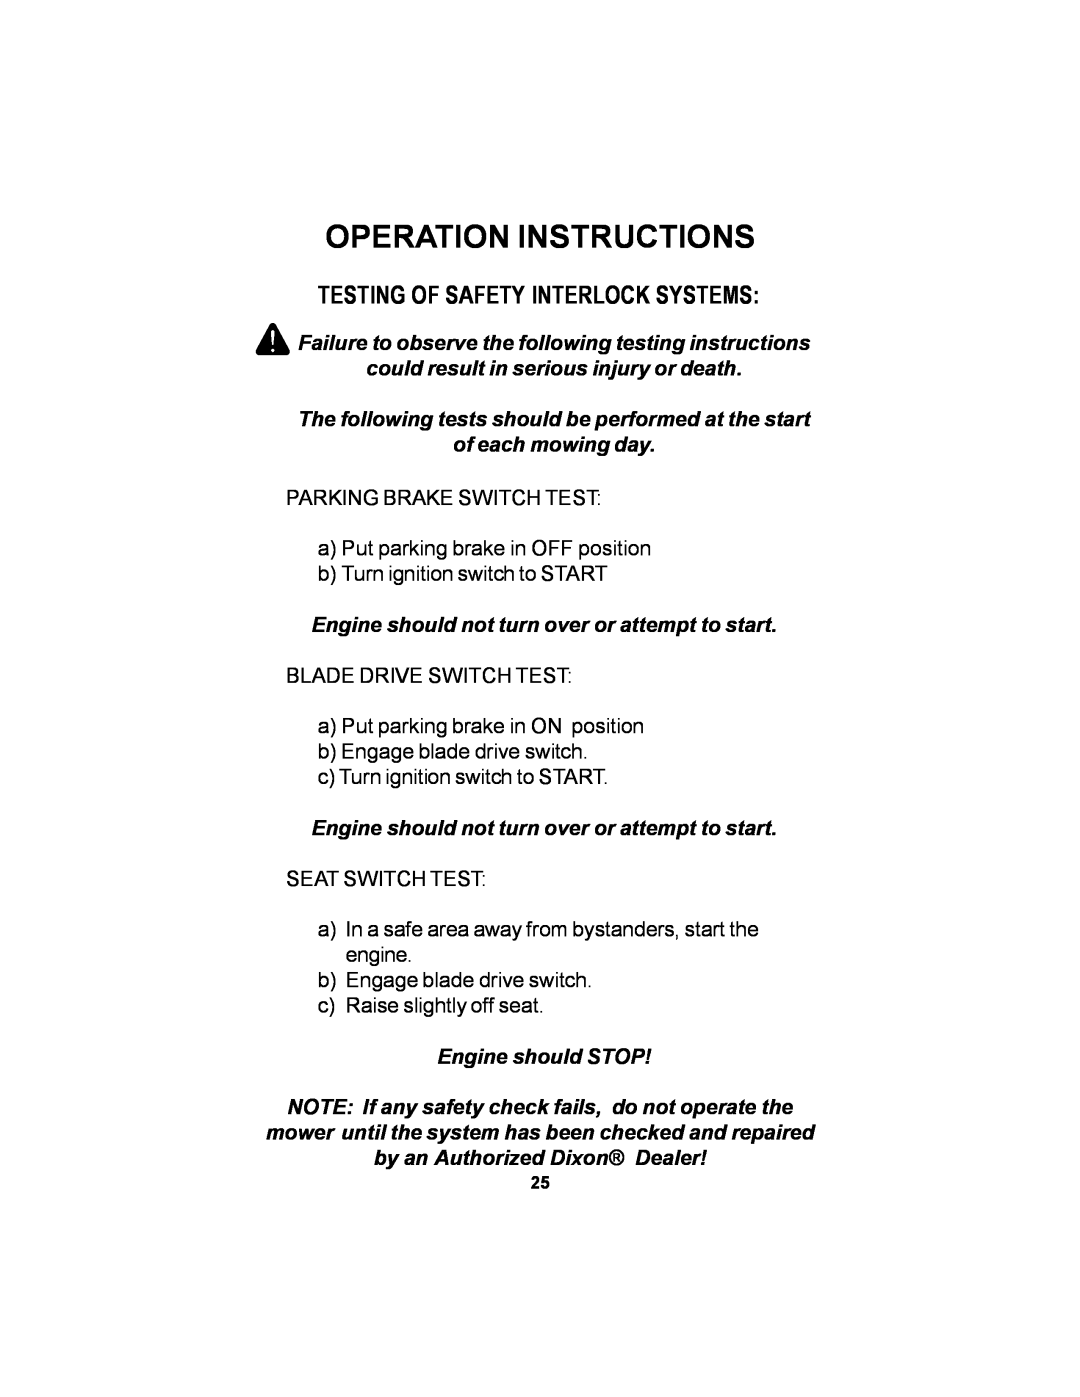 Dixon 14295-1005 manual Testing Of Safety Interlock Systems, Operation Instructions 